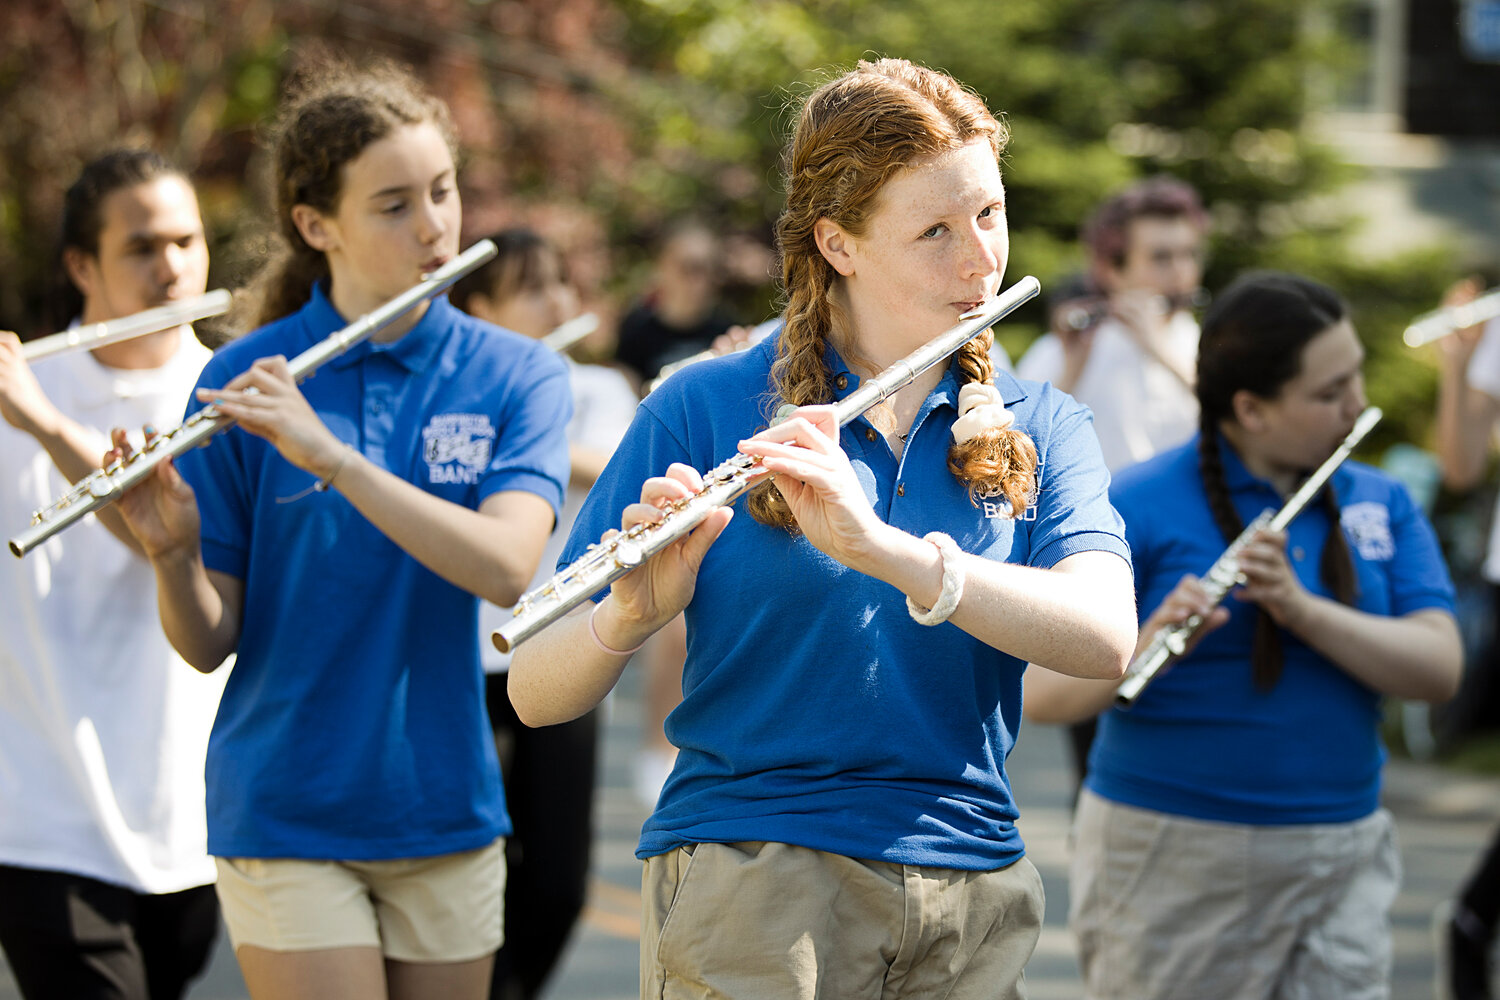 Members of the Barrington Middle School band play music while marching in the town's Memorial Day parade, Monday.